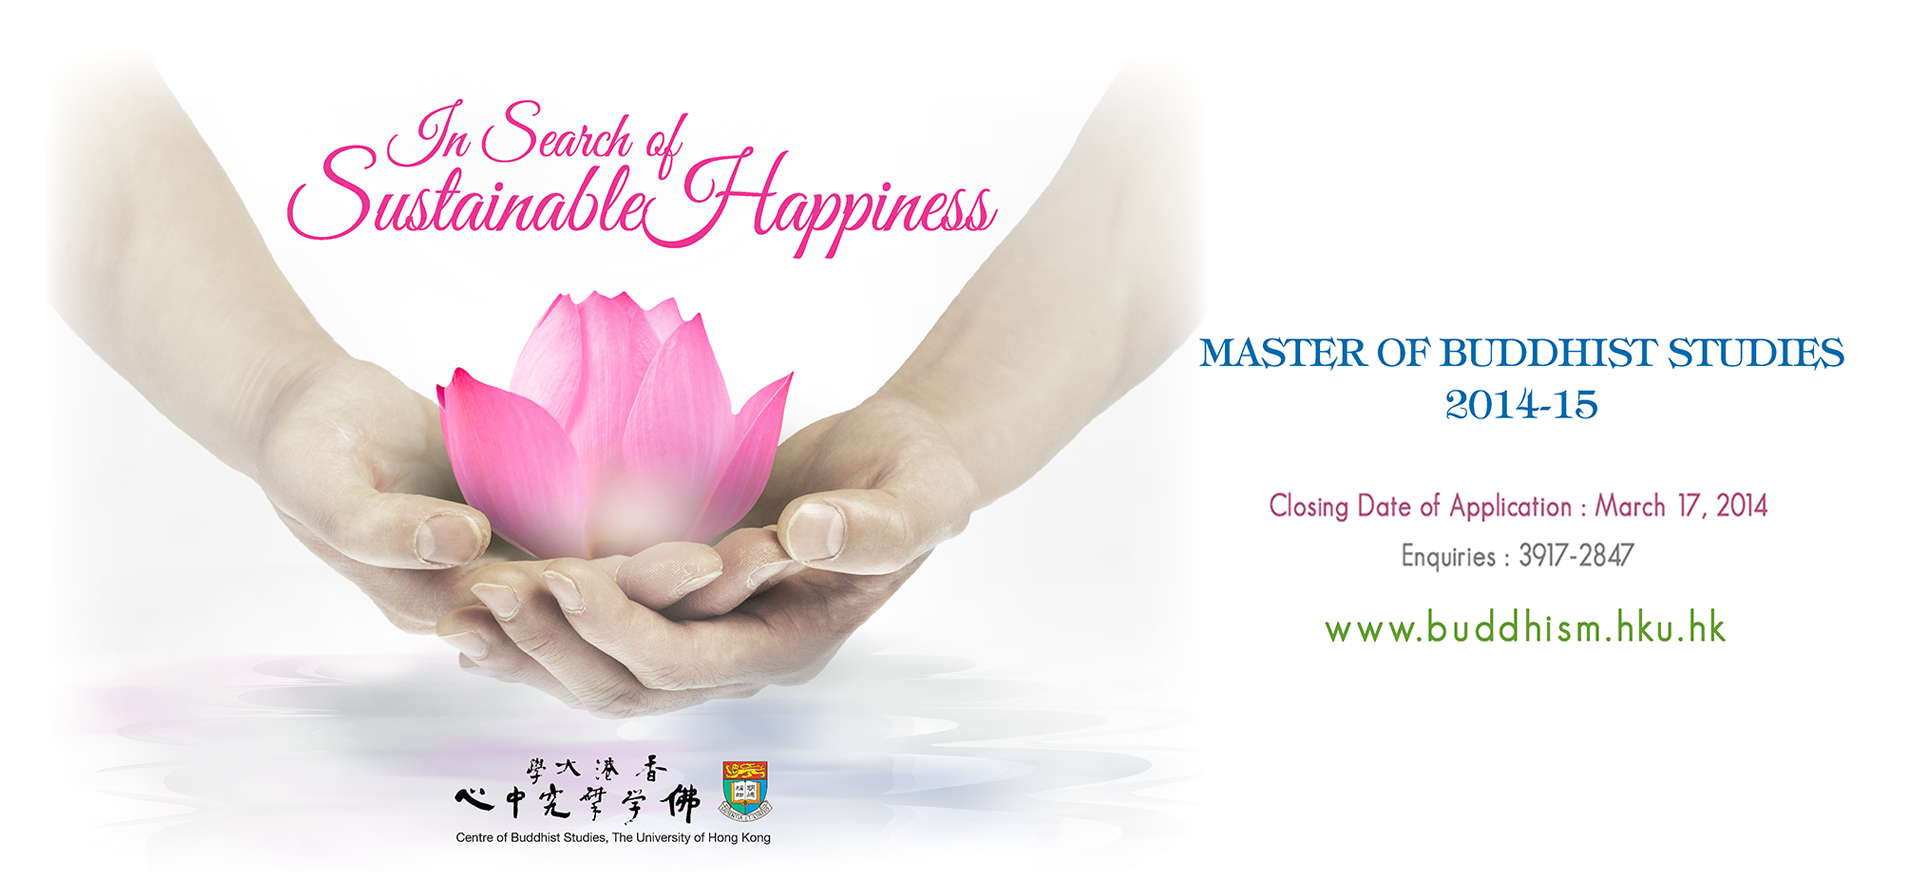 Master of Buddhist Studies 2014/15 – Open for Application